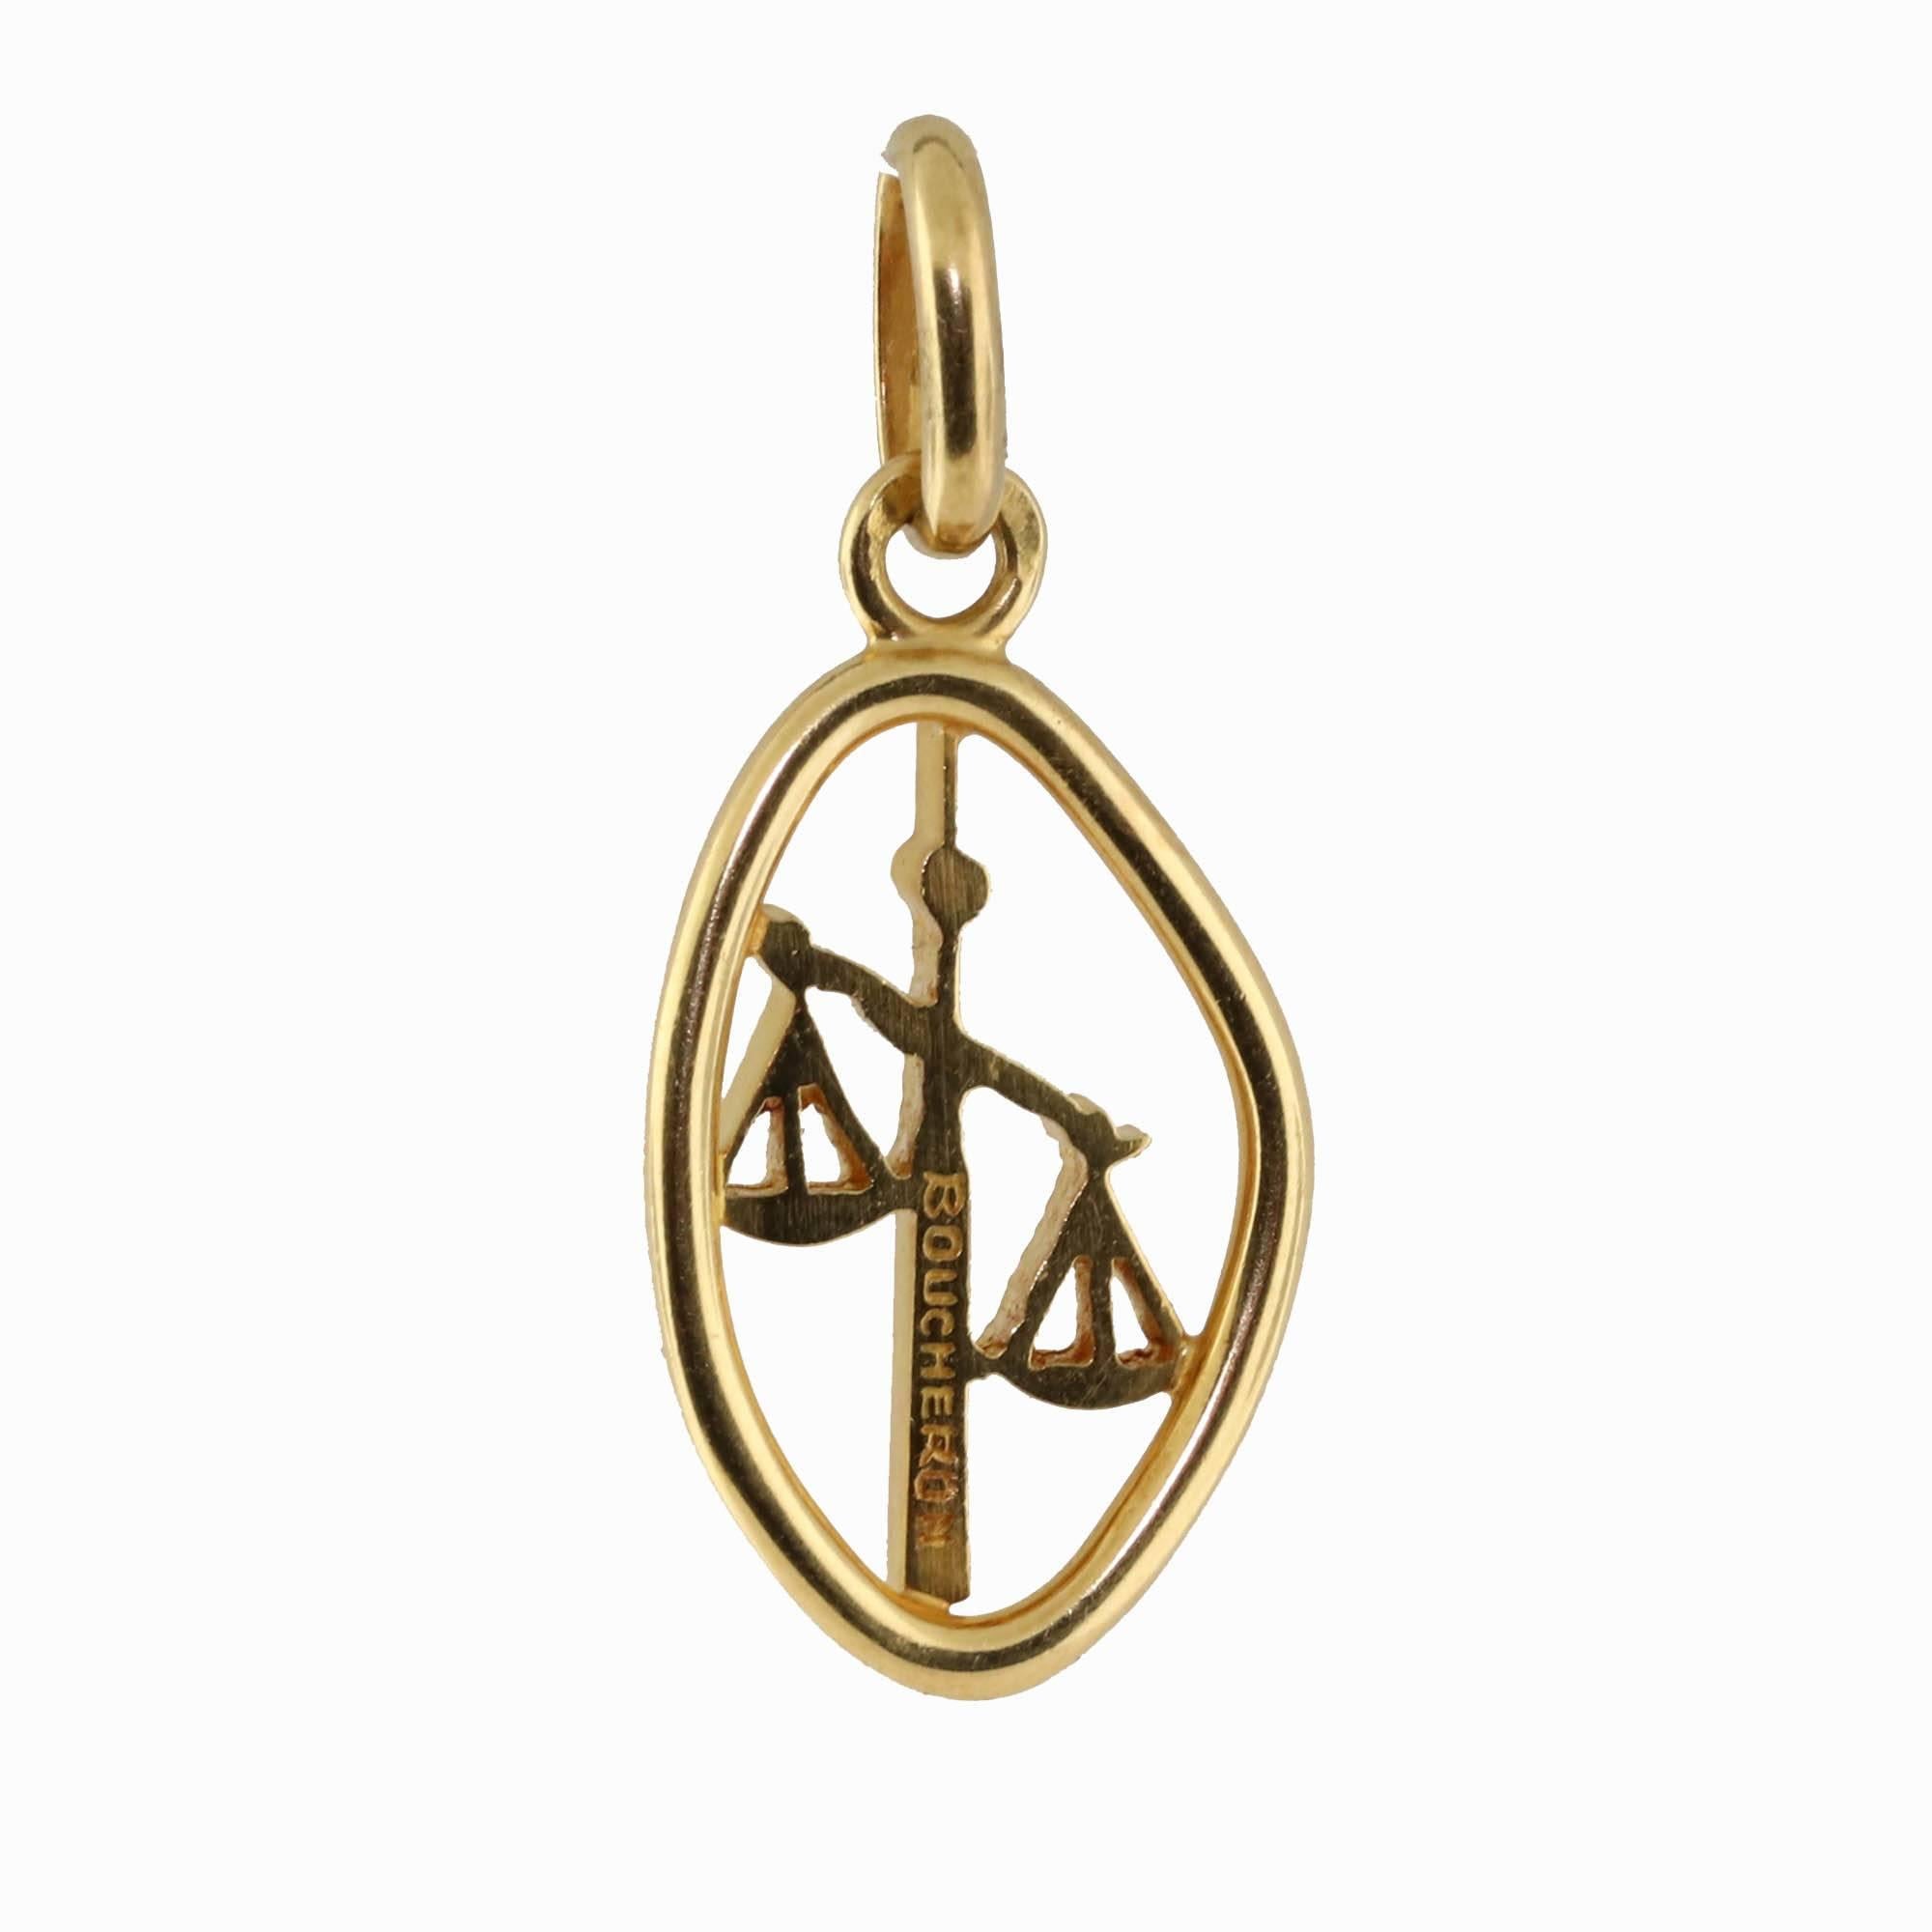 A wonderful Boucheron 18k yellow gold zodiac pendant of the sign Libra. These pendants are extremely difficult to find as they are no longer in production. This pendant works great as well for someone who passed a law exam as it signifies the